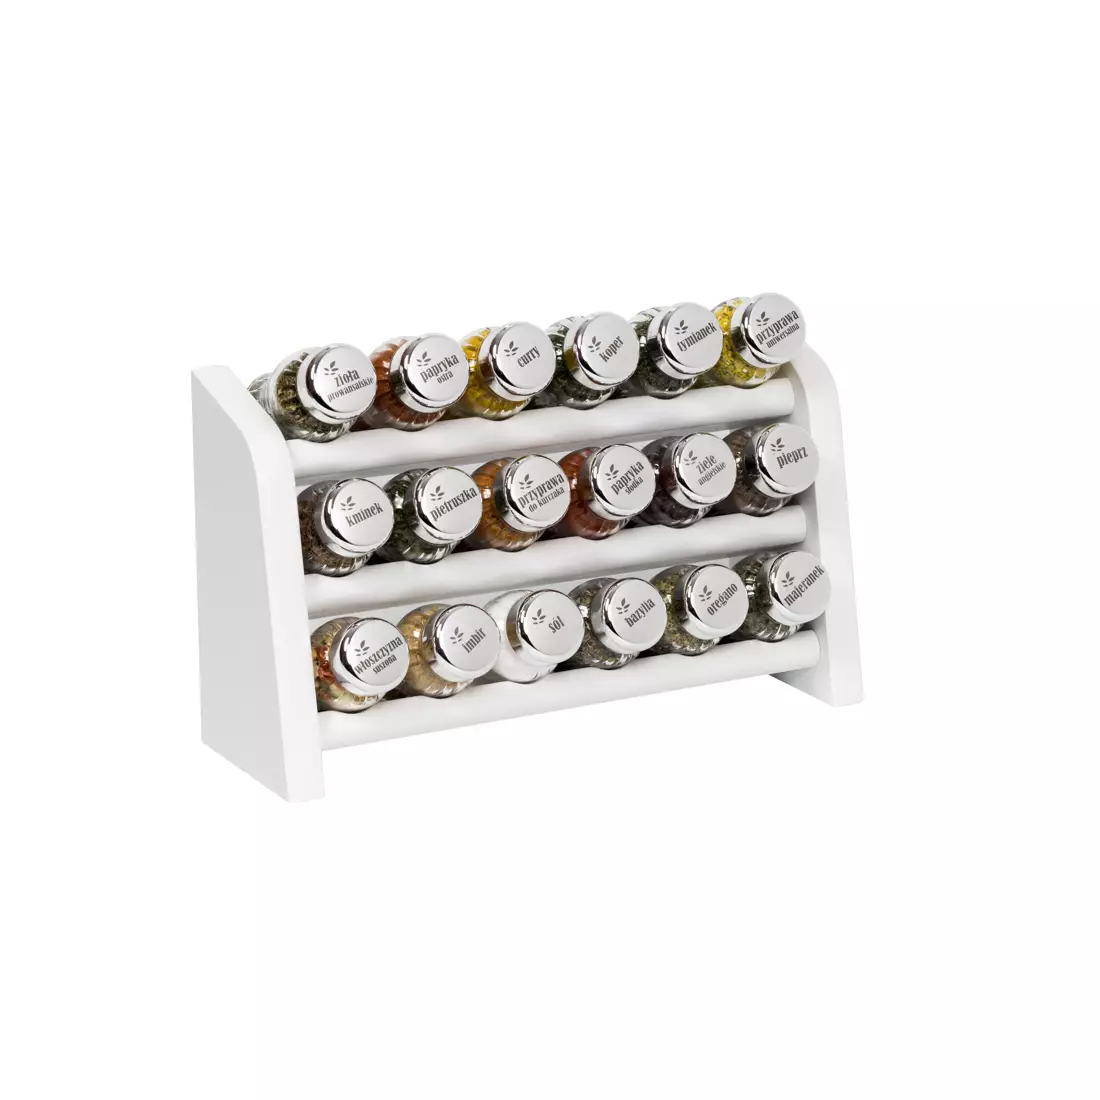 GALD 18NS spice rack, white gloss